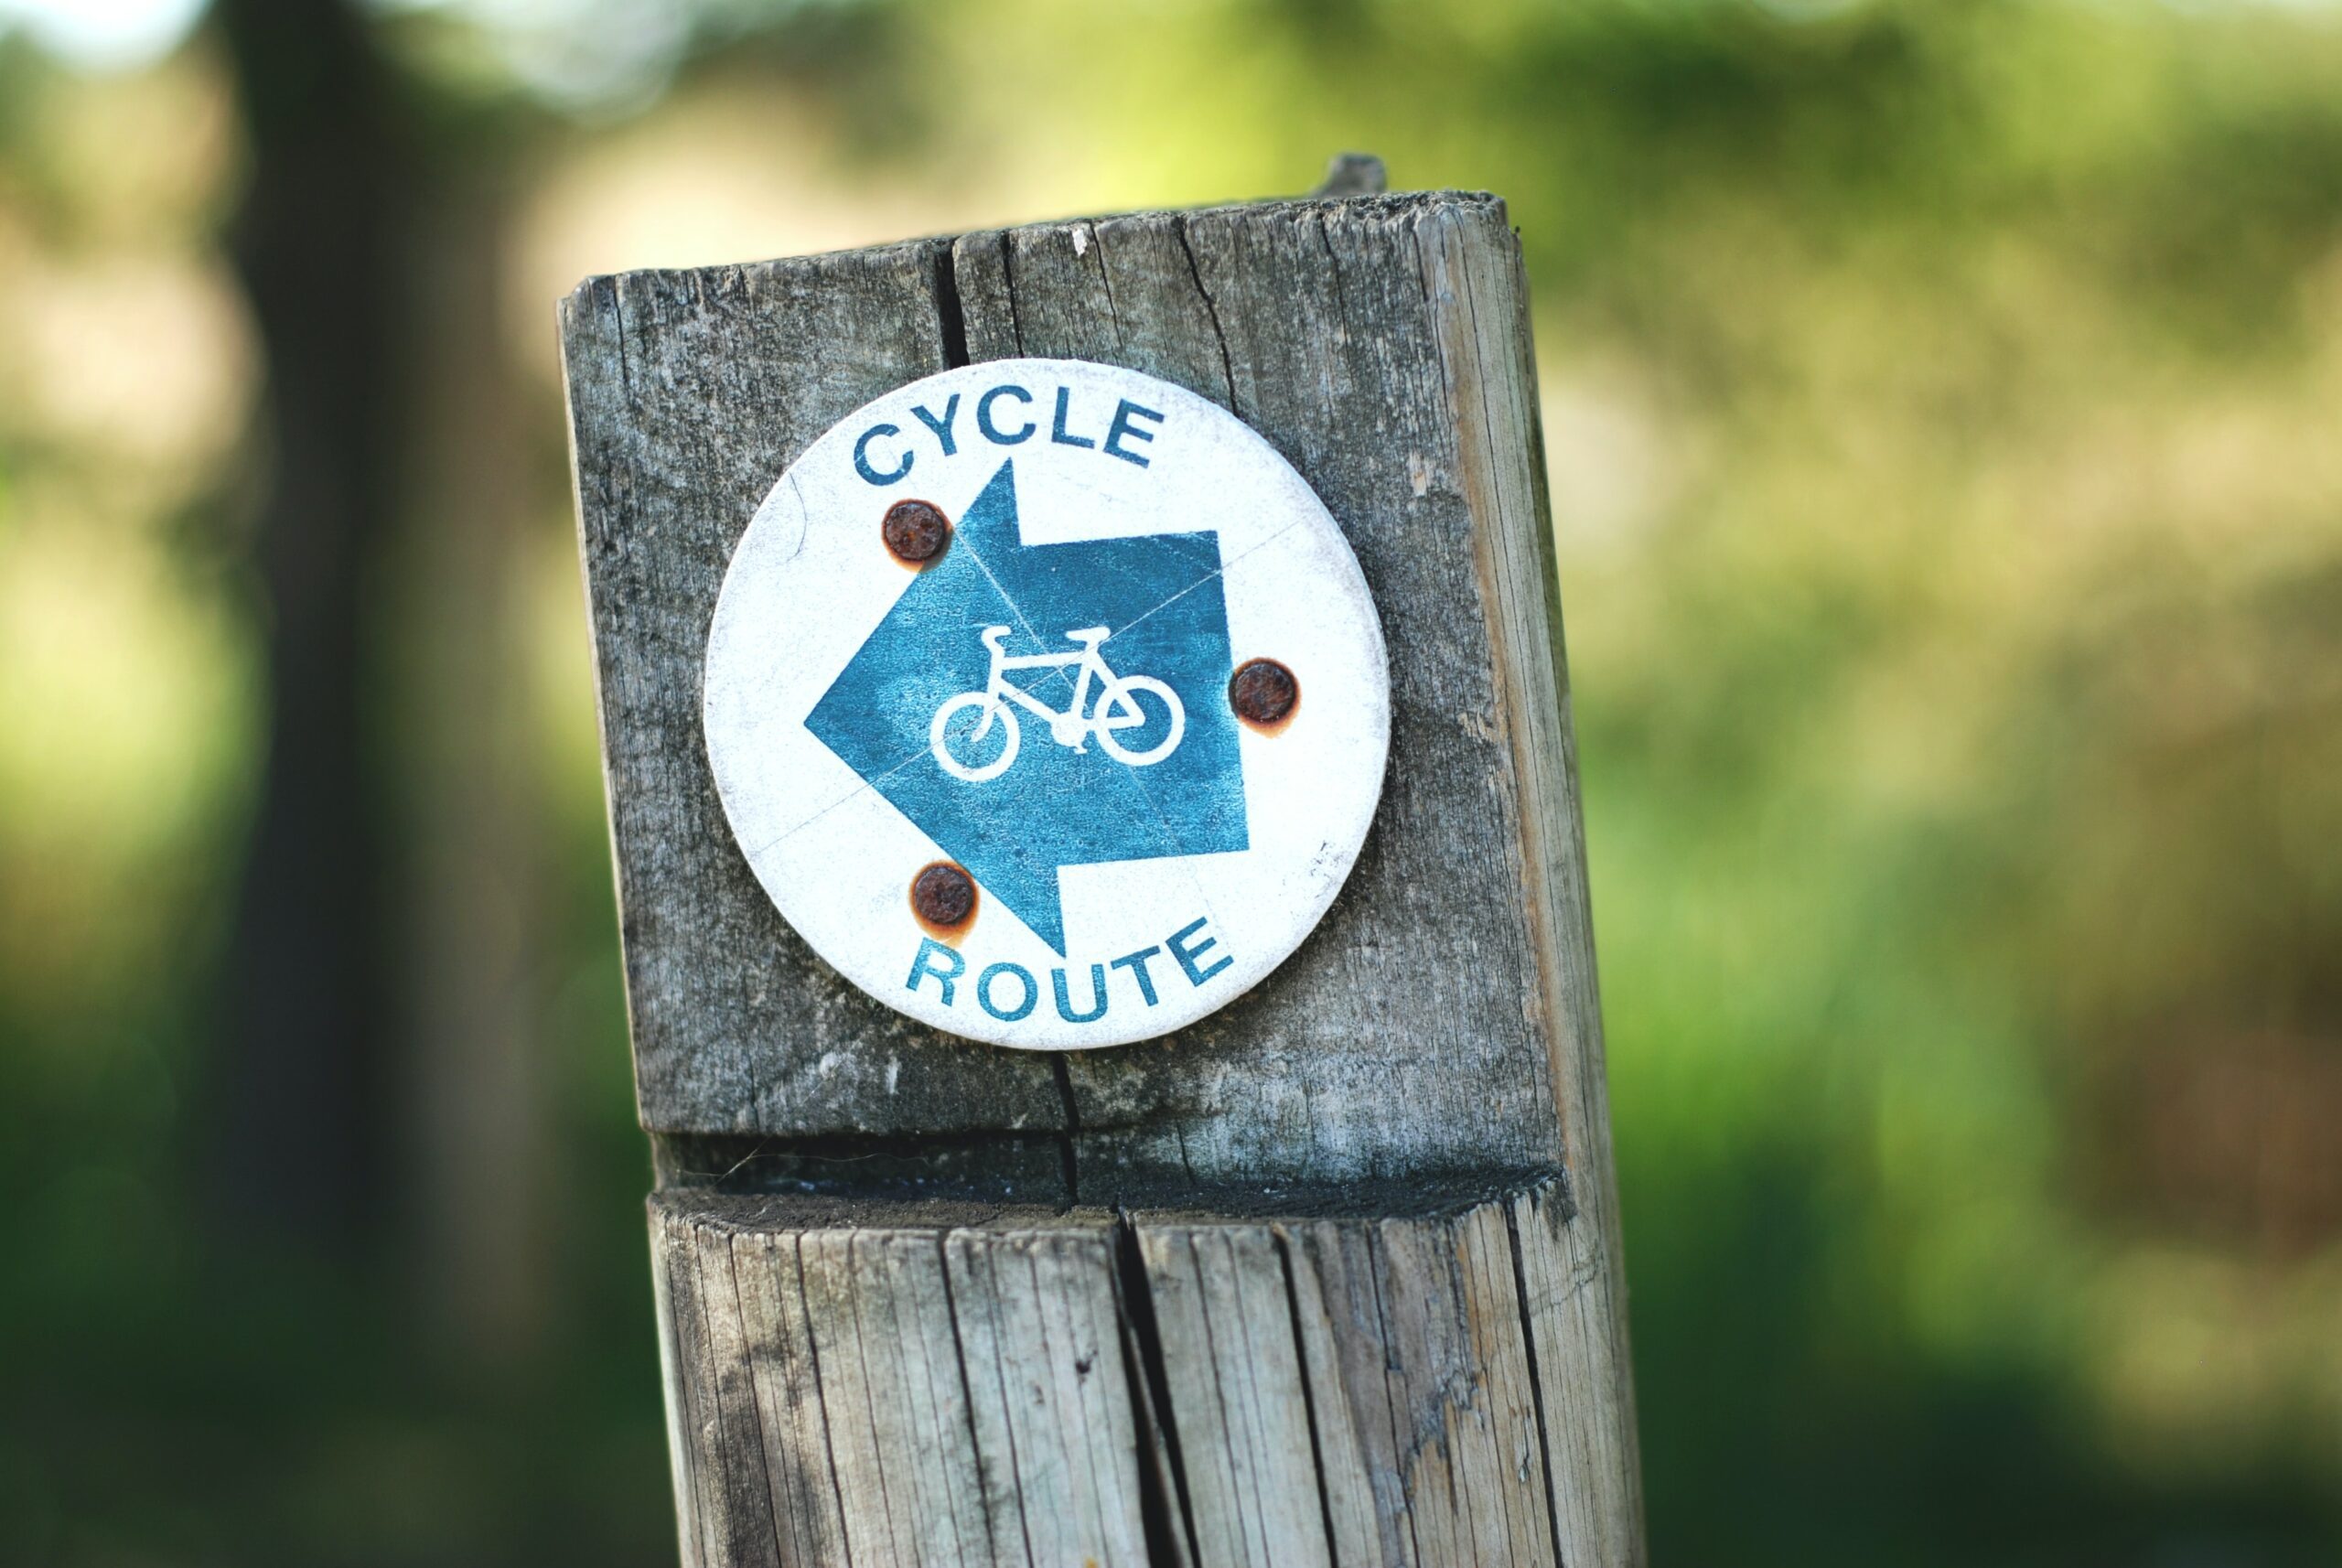 A cycle route sign against a leafy background